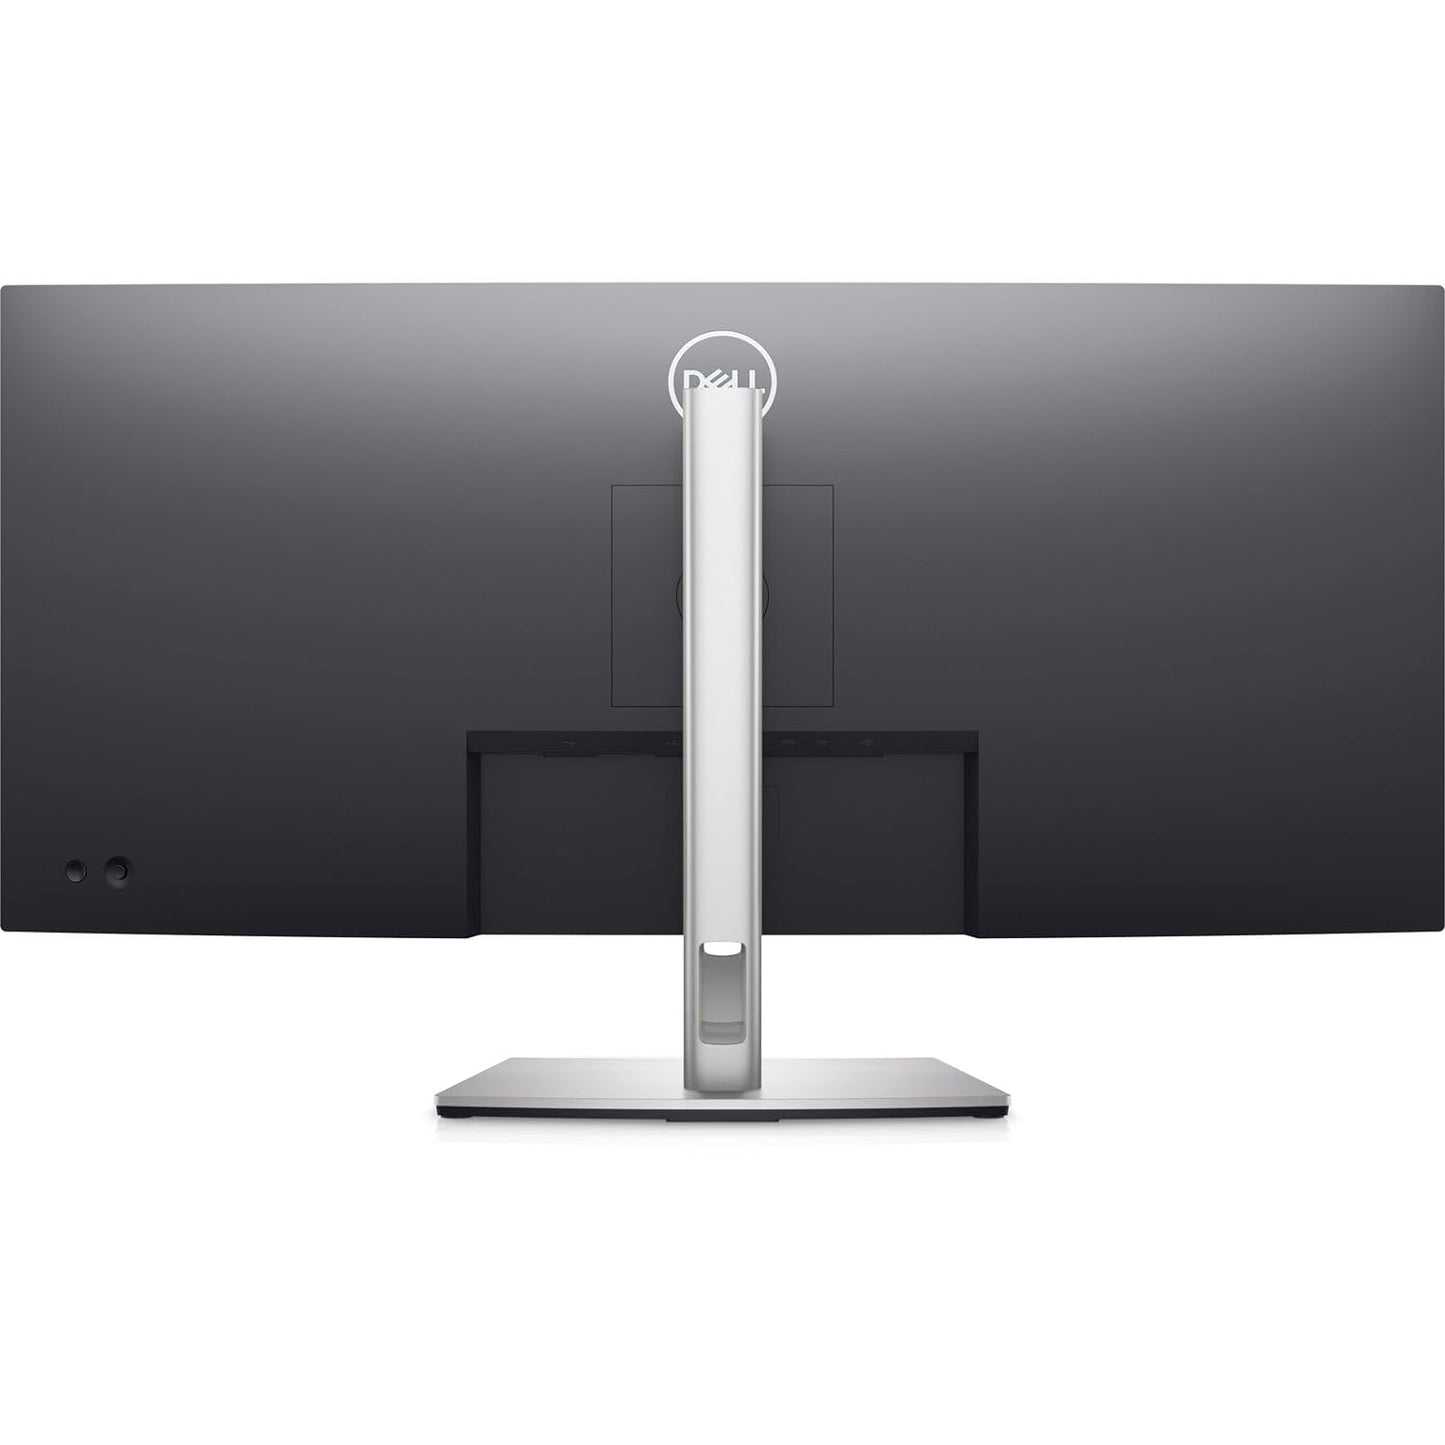 Dell 34.14-inch Ultrawide Monitor with 1440p Curved Display and USB-C Hub Connectivity